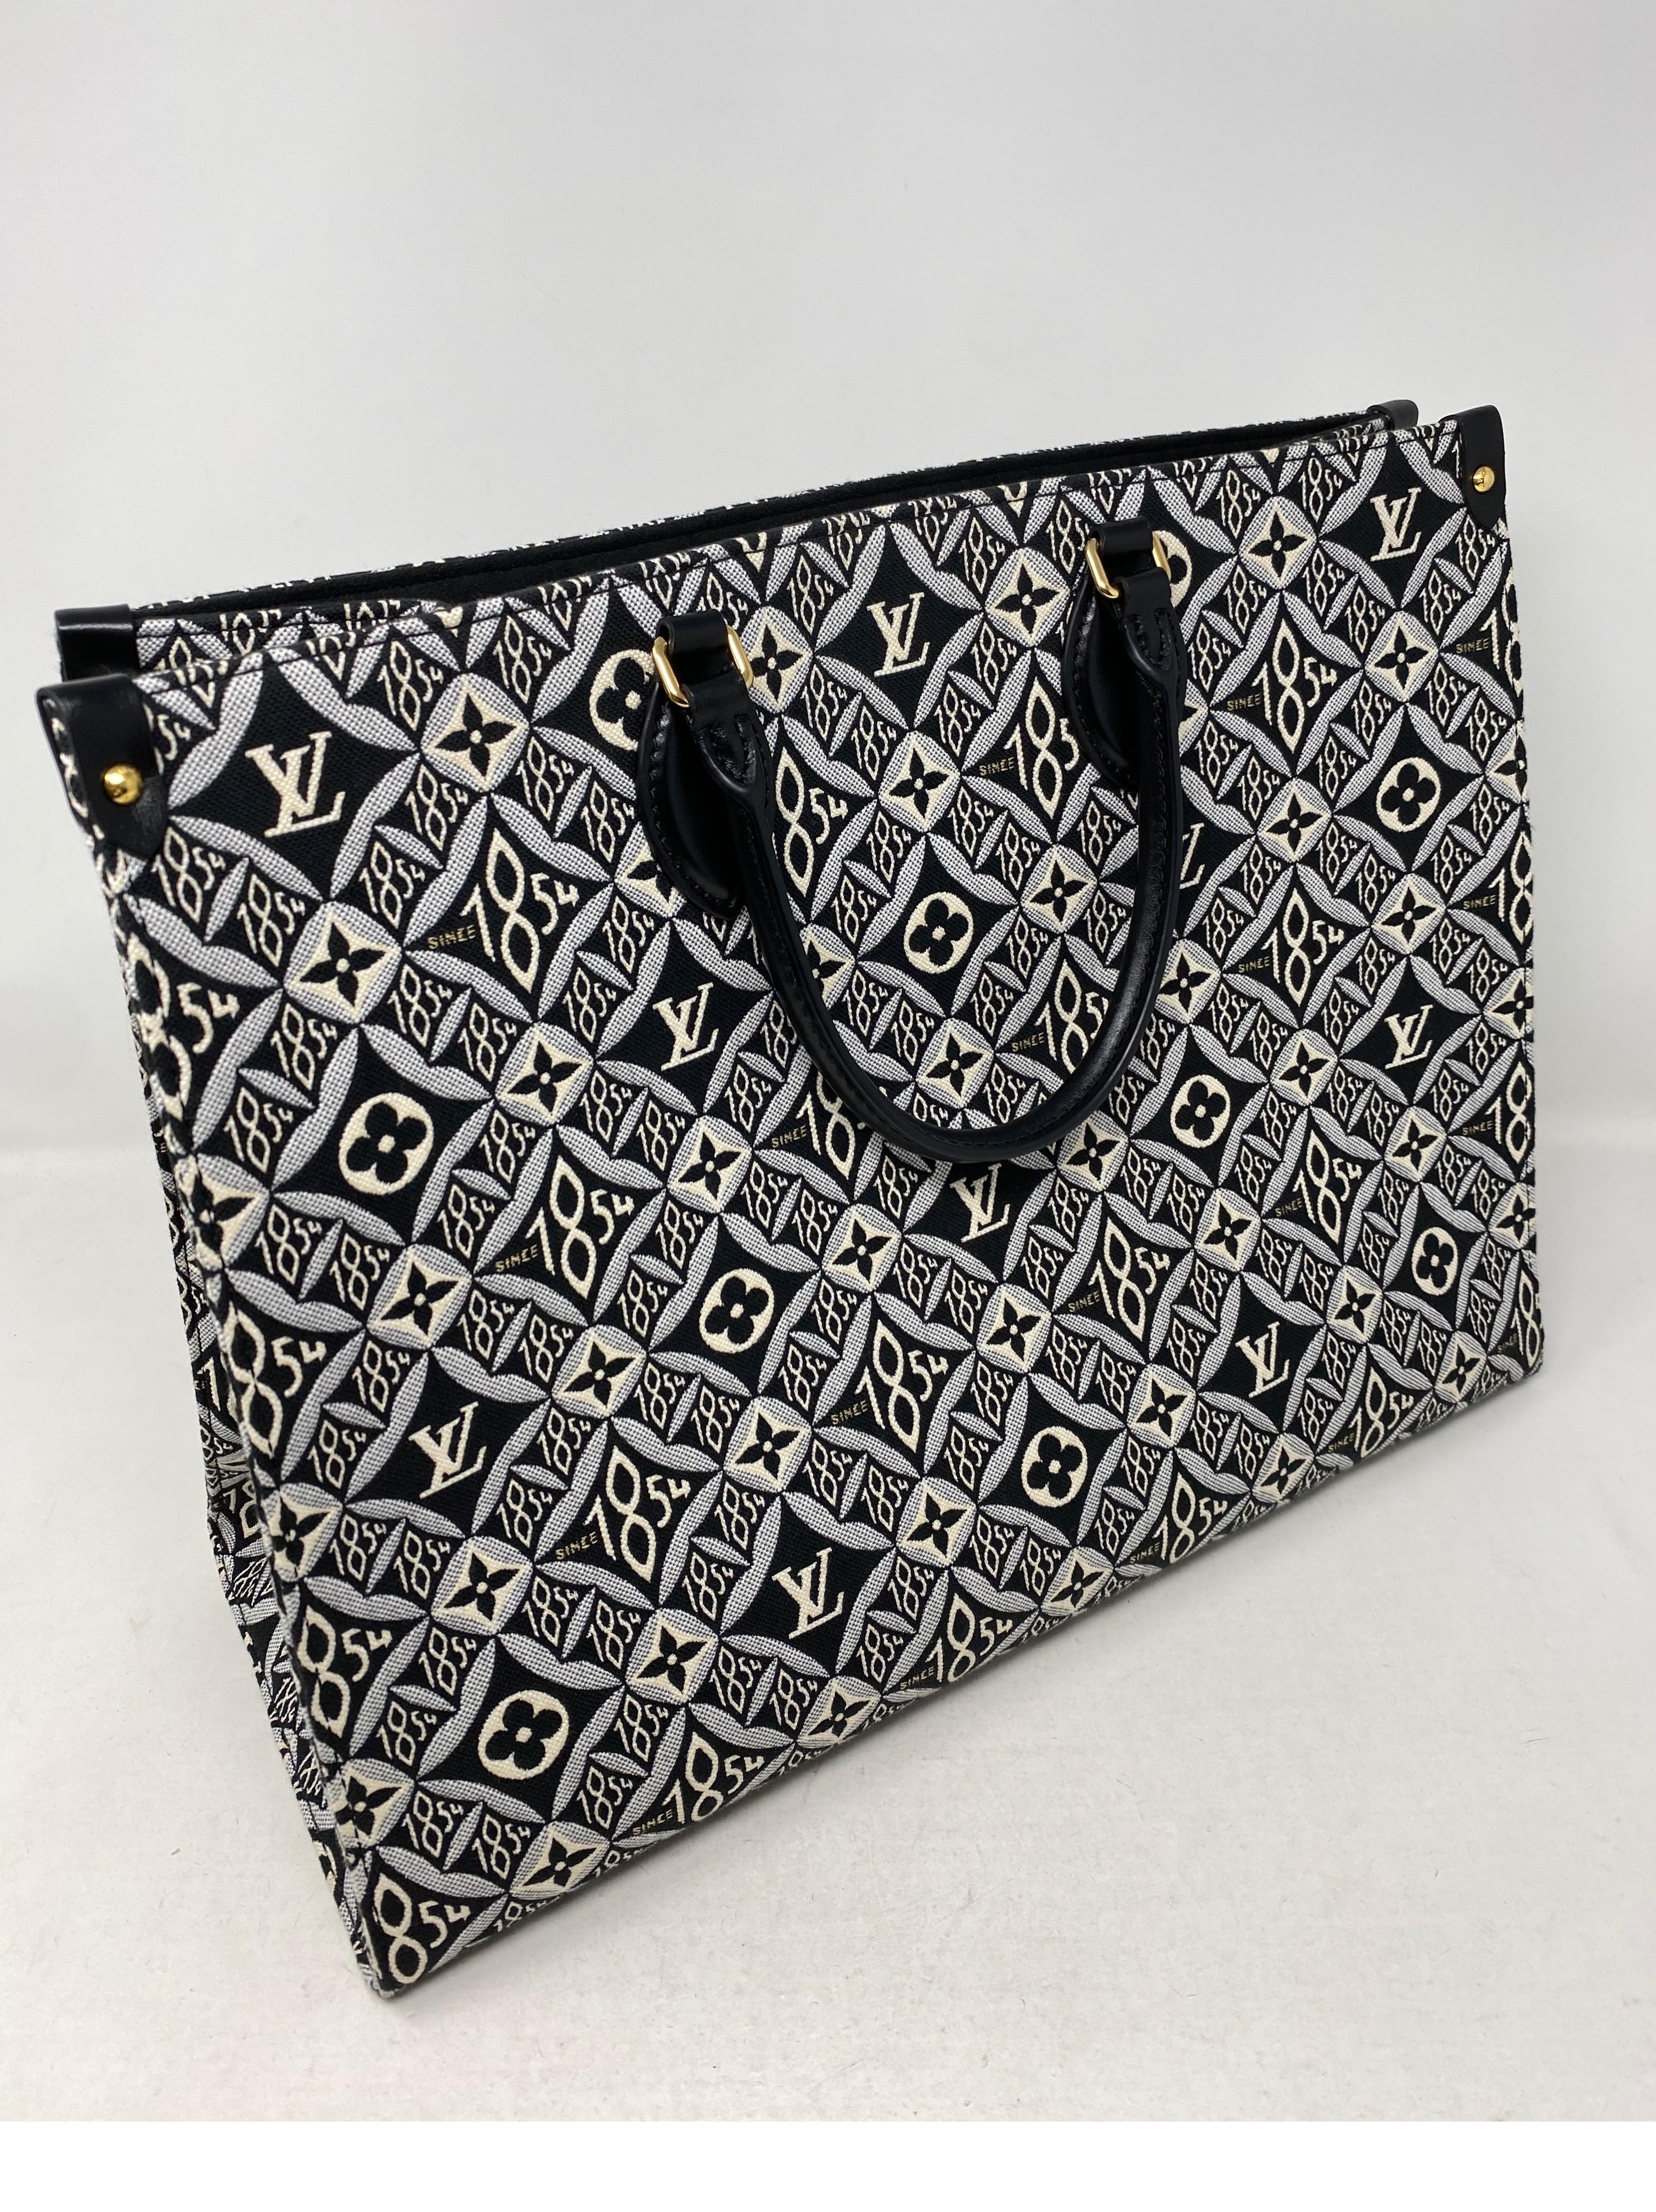 Louis Vuitton 1854 On The Go Bag. Beautiful embroidered black and white detailed big tote. Mint like new condition. Two types of handles to be worn different ways. Rare and limited. Guaranteed authentic. 